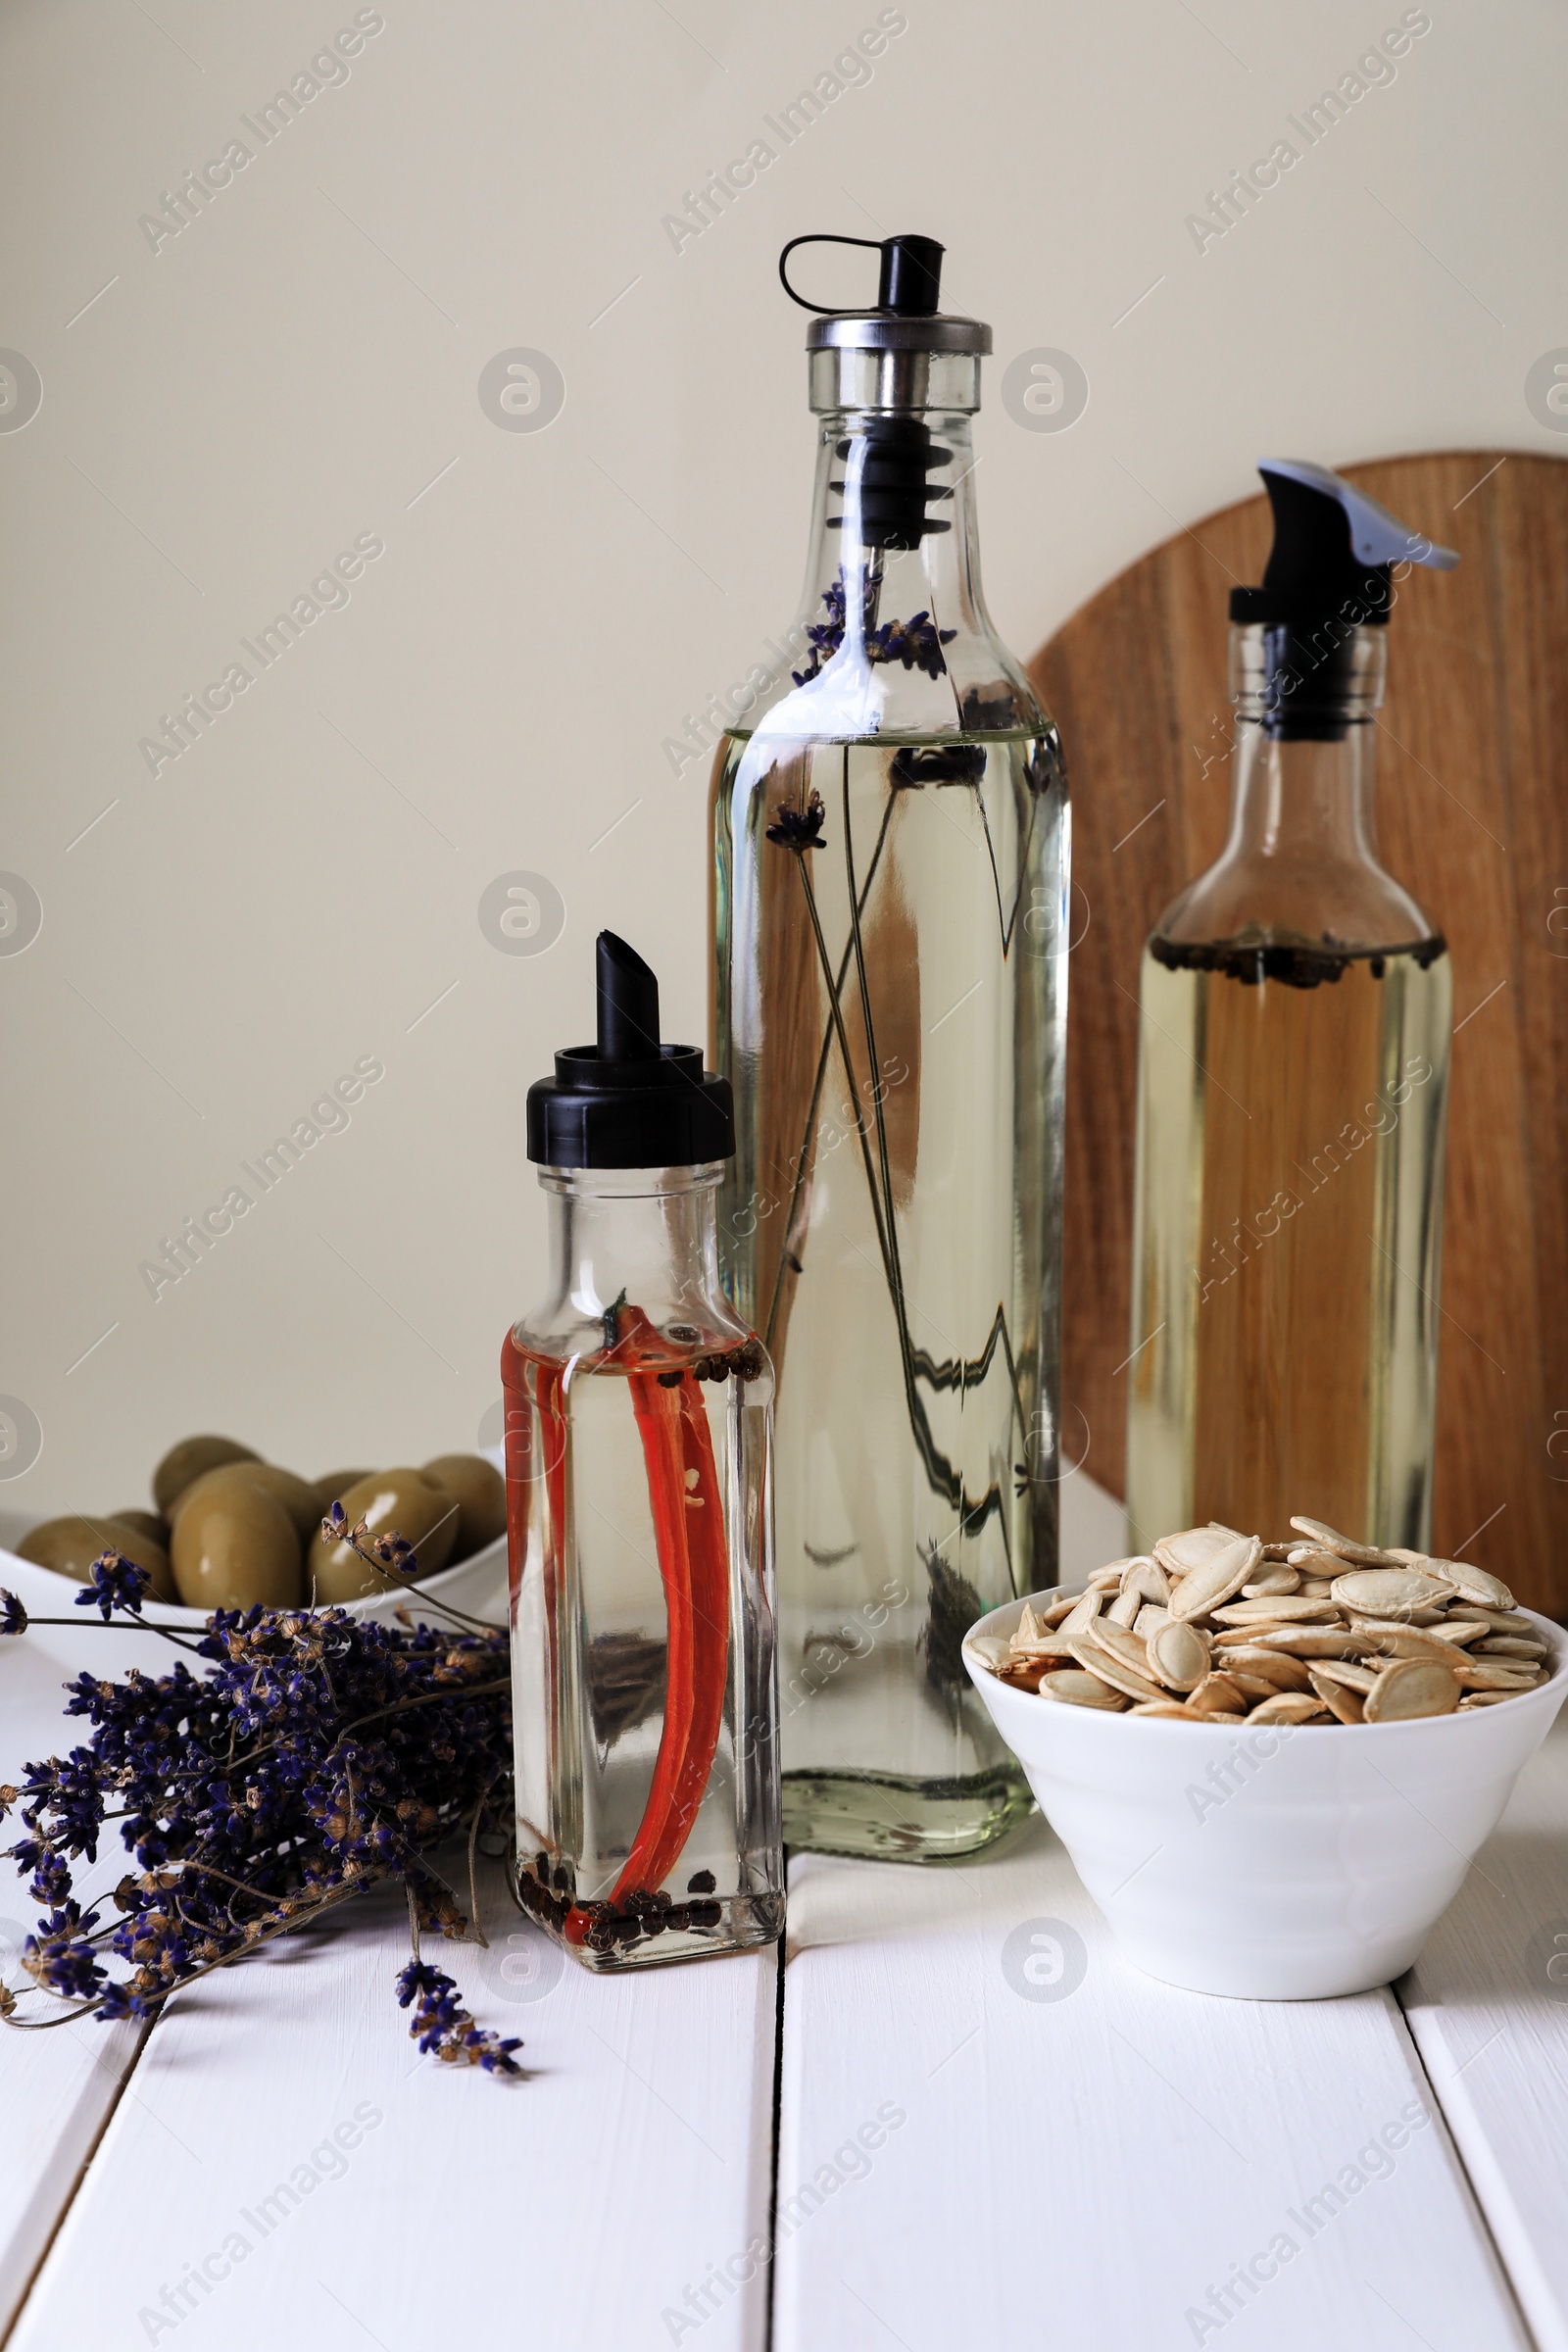 Photo of Different cooking oils and ingredients on white wooden table against light background